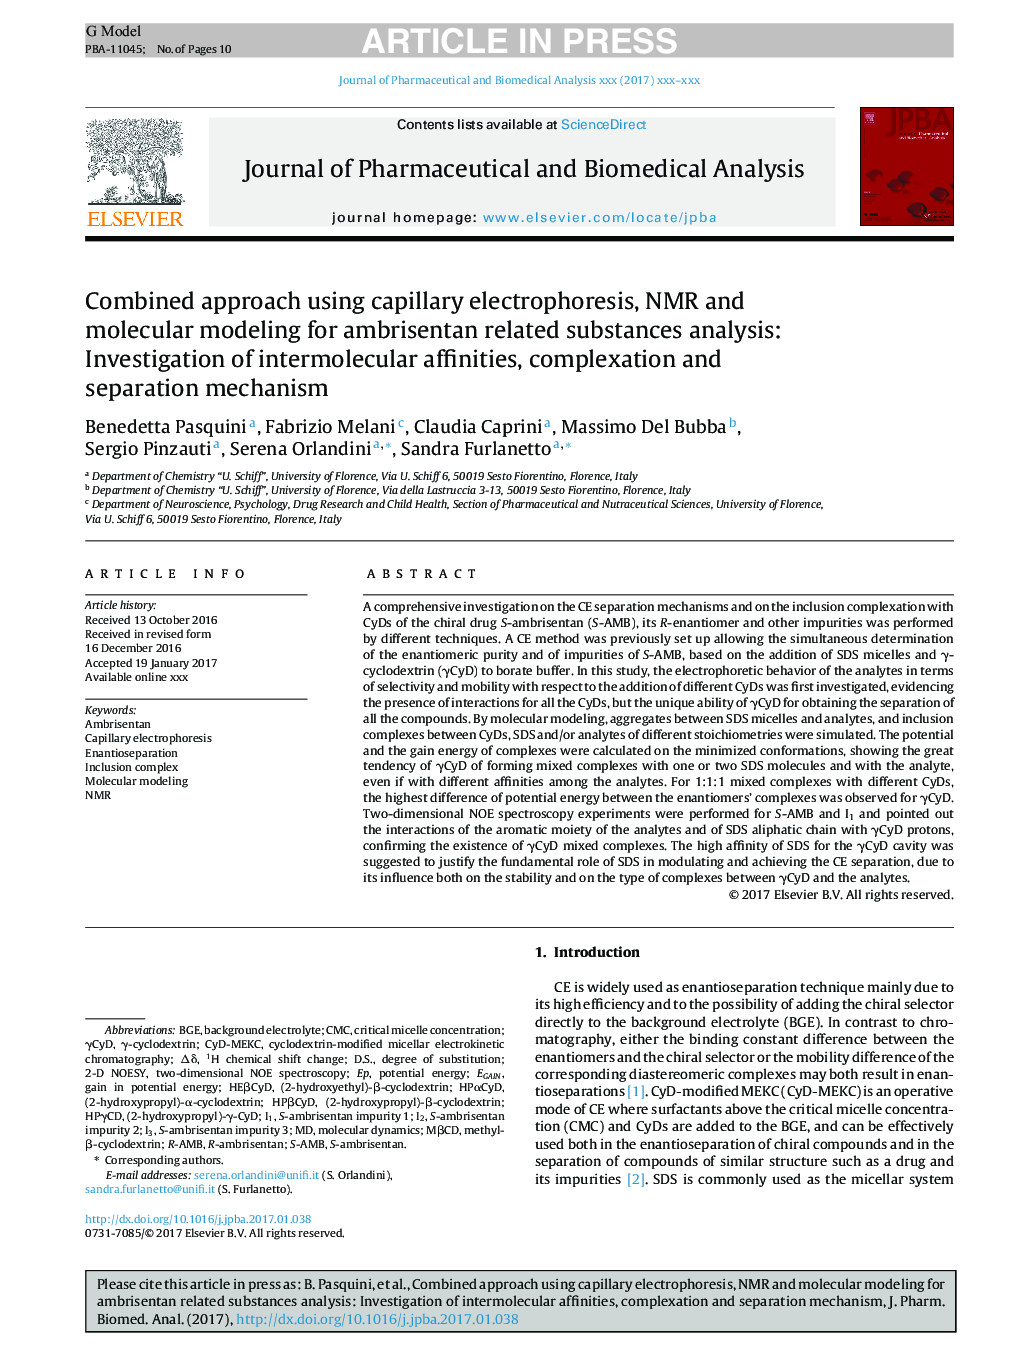 Combined approach using capillary electrophoresis, NMR and molecular modeling for ambrisentan related substances analysis: Investigation of intermolecular affinities, complexation and separation mechanism